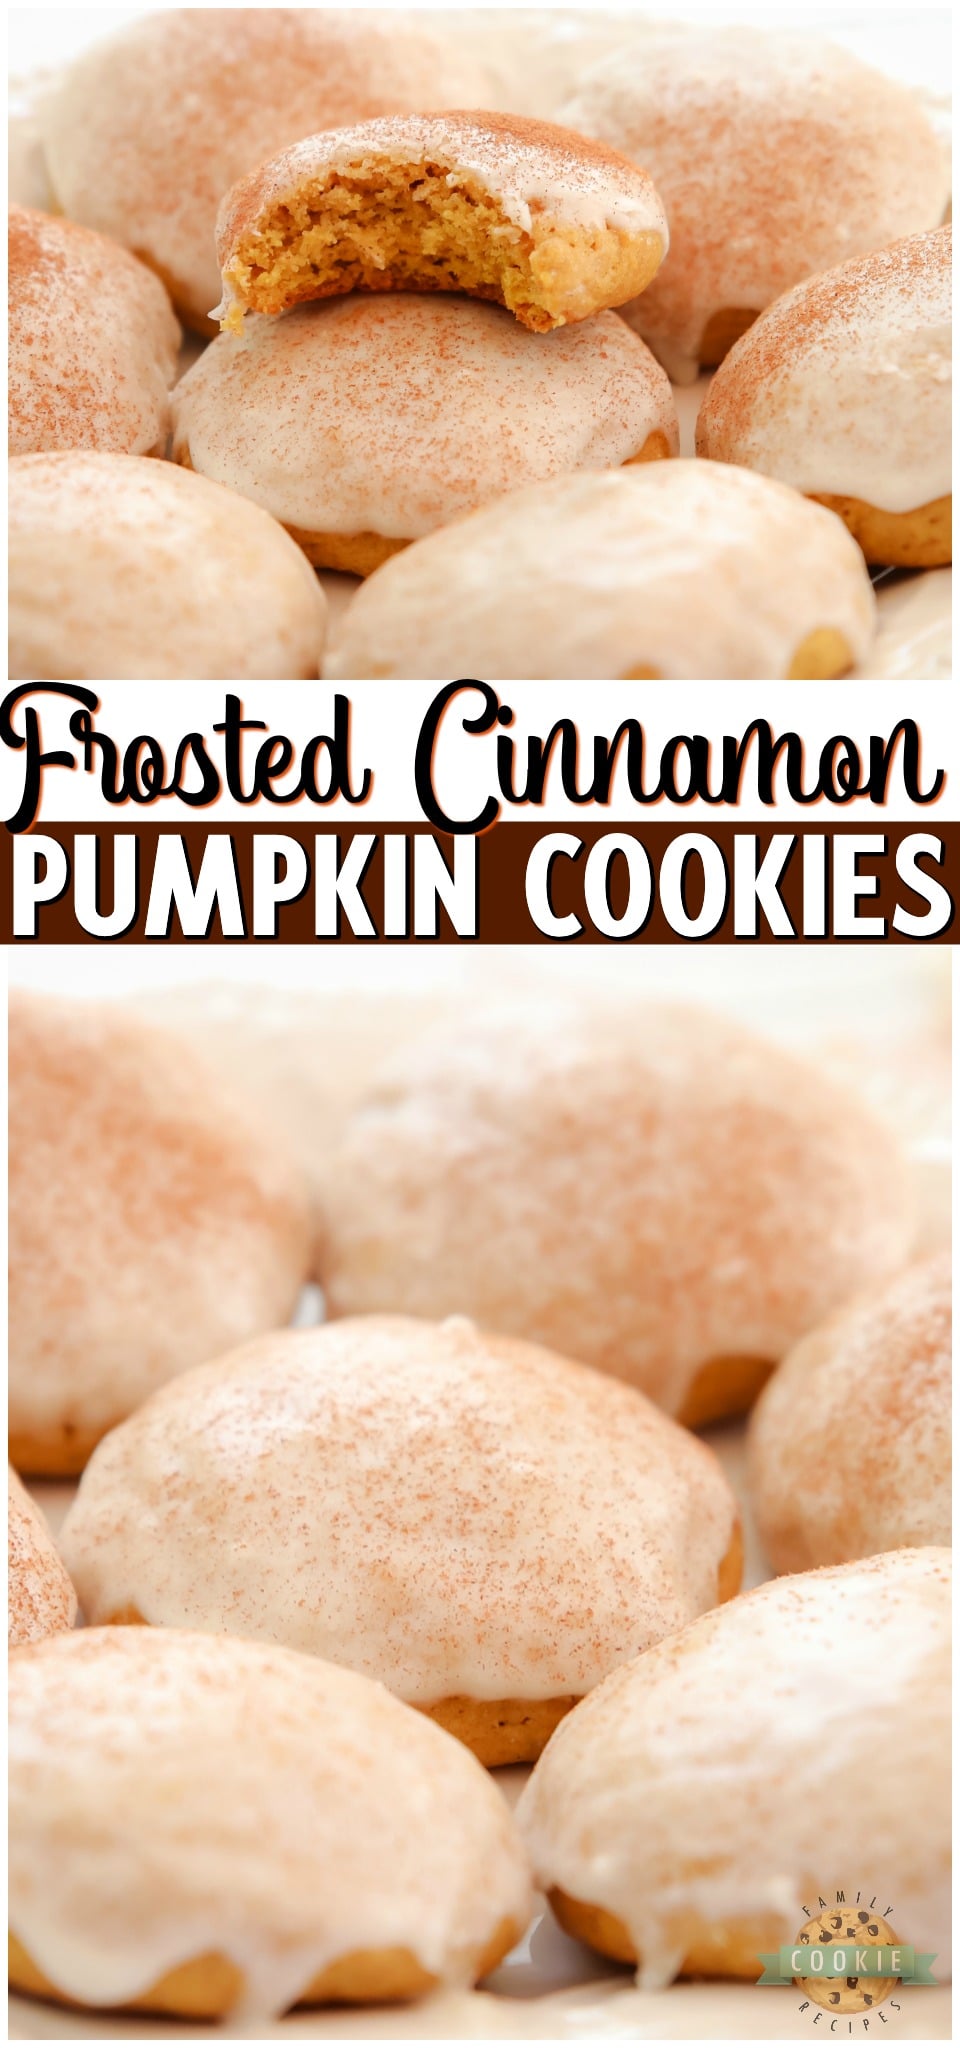 Iced Cinnamon Pumpkin Cookies are soft & pillowy pumpkin cookies topped with a simple vanilla icing and cinnamon. Lovely texture & flavor in these homemade pumpkin sugar cookies. #pumpkin #cookies #iced #baking #desserts #easyrecipe from FAMILY COOKIE RECIPES via @buttergirls